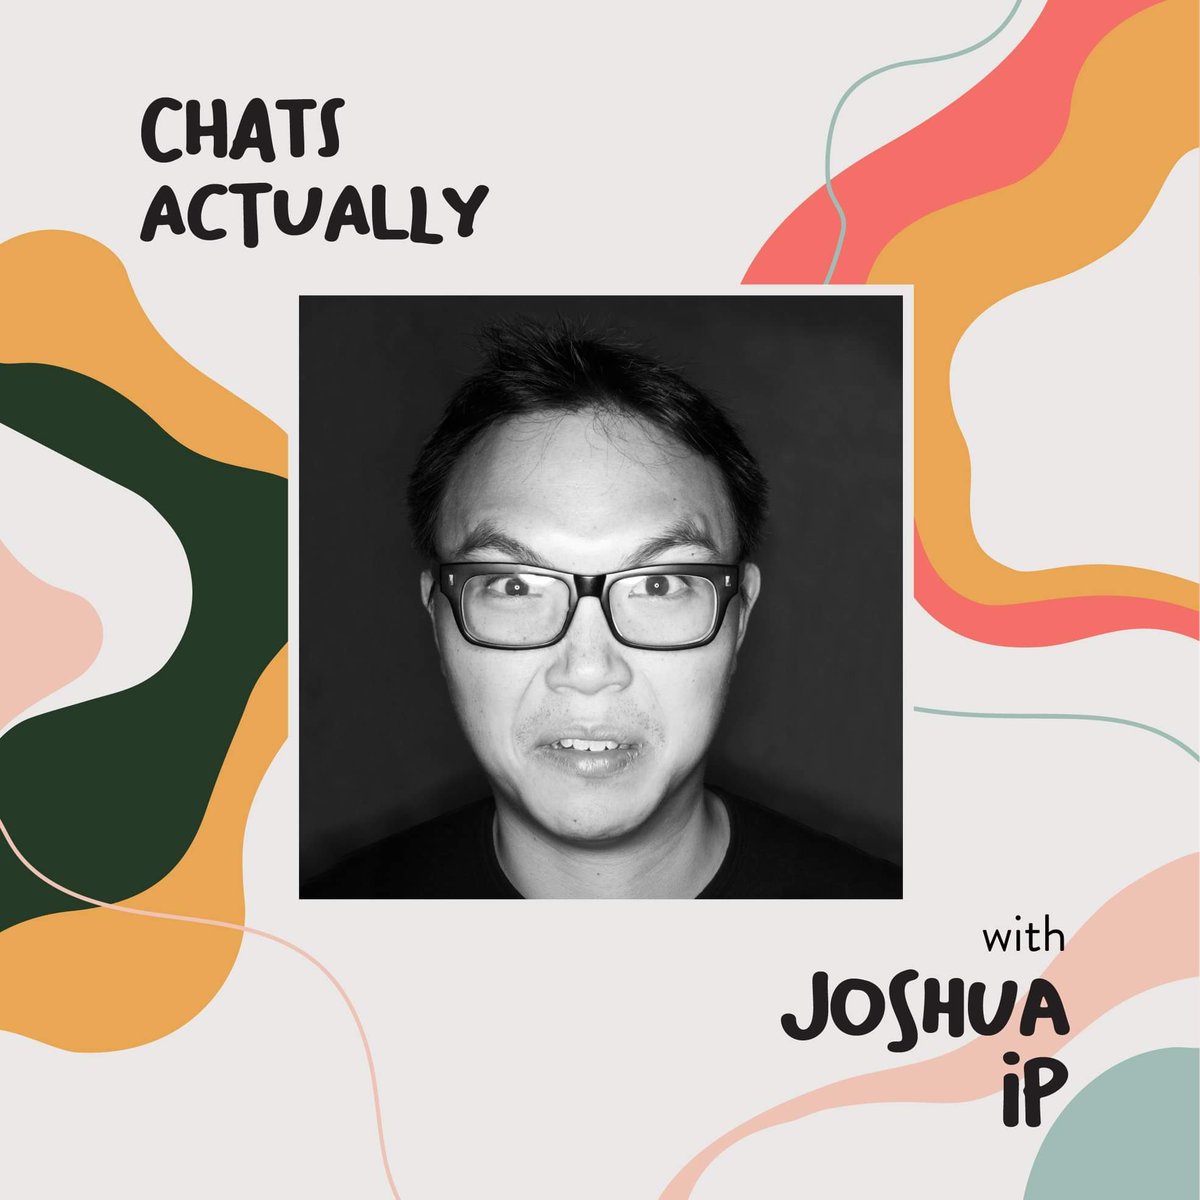 IG Live ChatsActually with Joshua Ip, kingmaker of the SingLit scene, 24th Apr 2pm.Let’s talk about why - writing sonnets is not easy- his 2nd poetry collection got naked lady on the cover- you should support SingLit StationWe‘ll also be taking questions. #ChatsActually